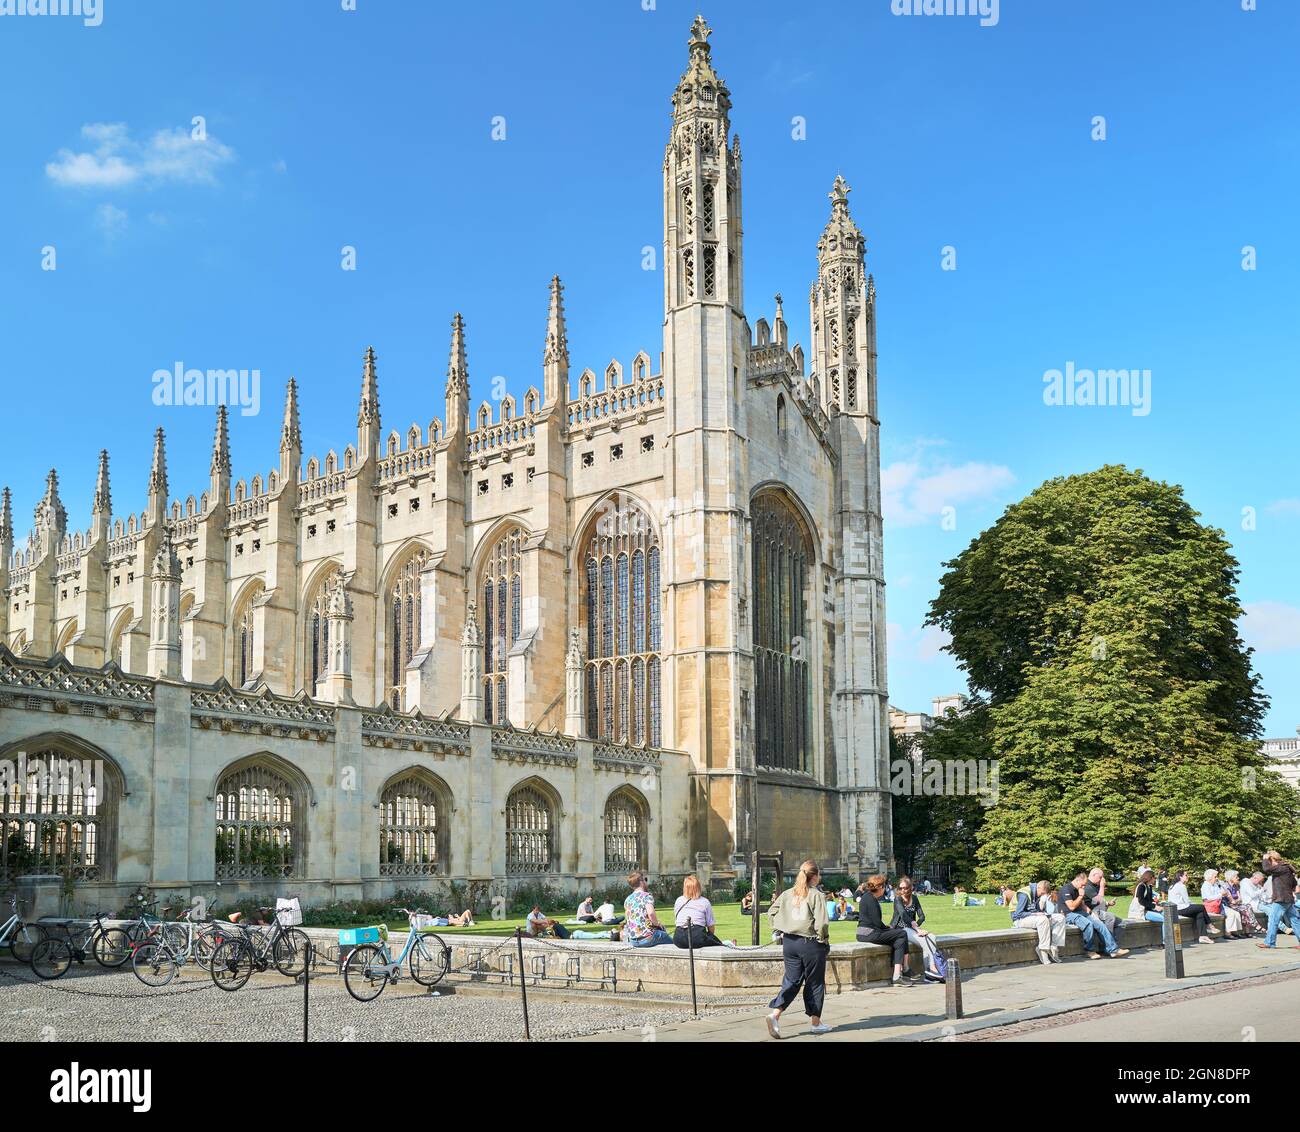 Many tourists sit and relax on the low wall outside the chapel of King's college, university of Cambridge, England, on a sunny summer day. Stock Photo